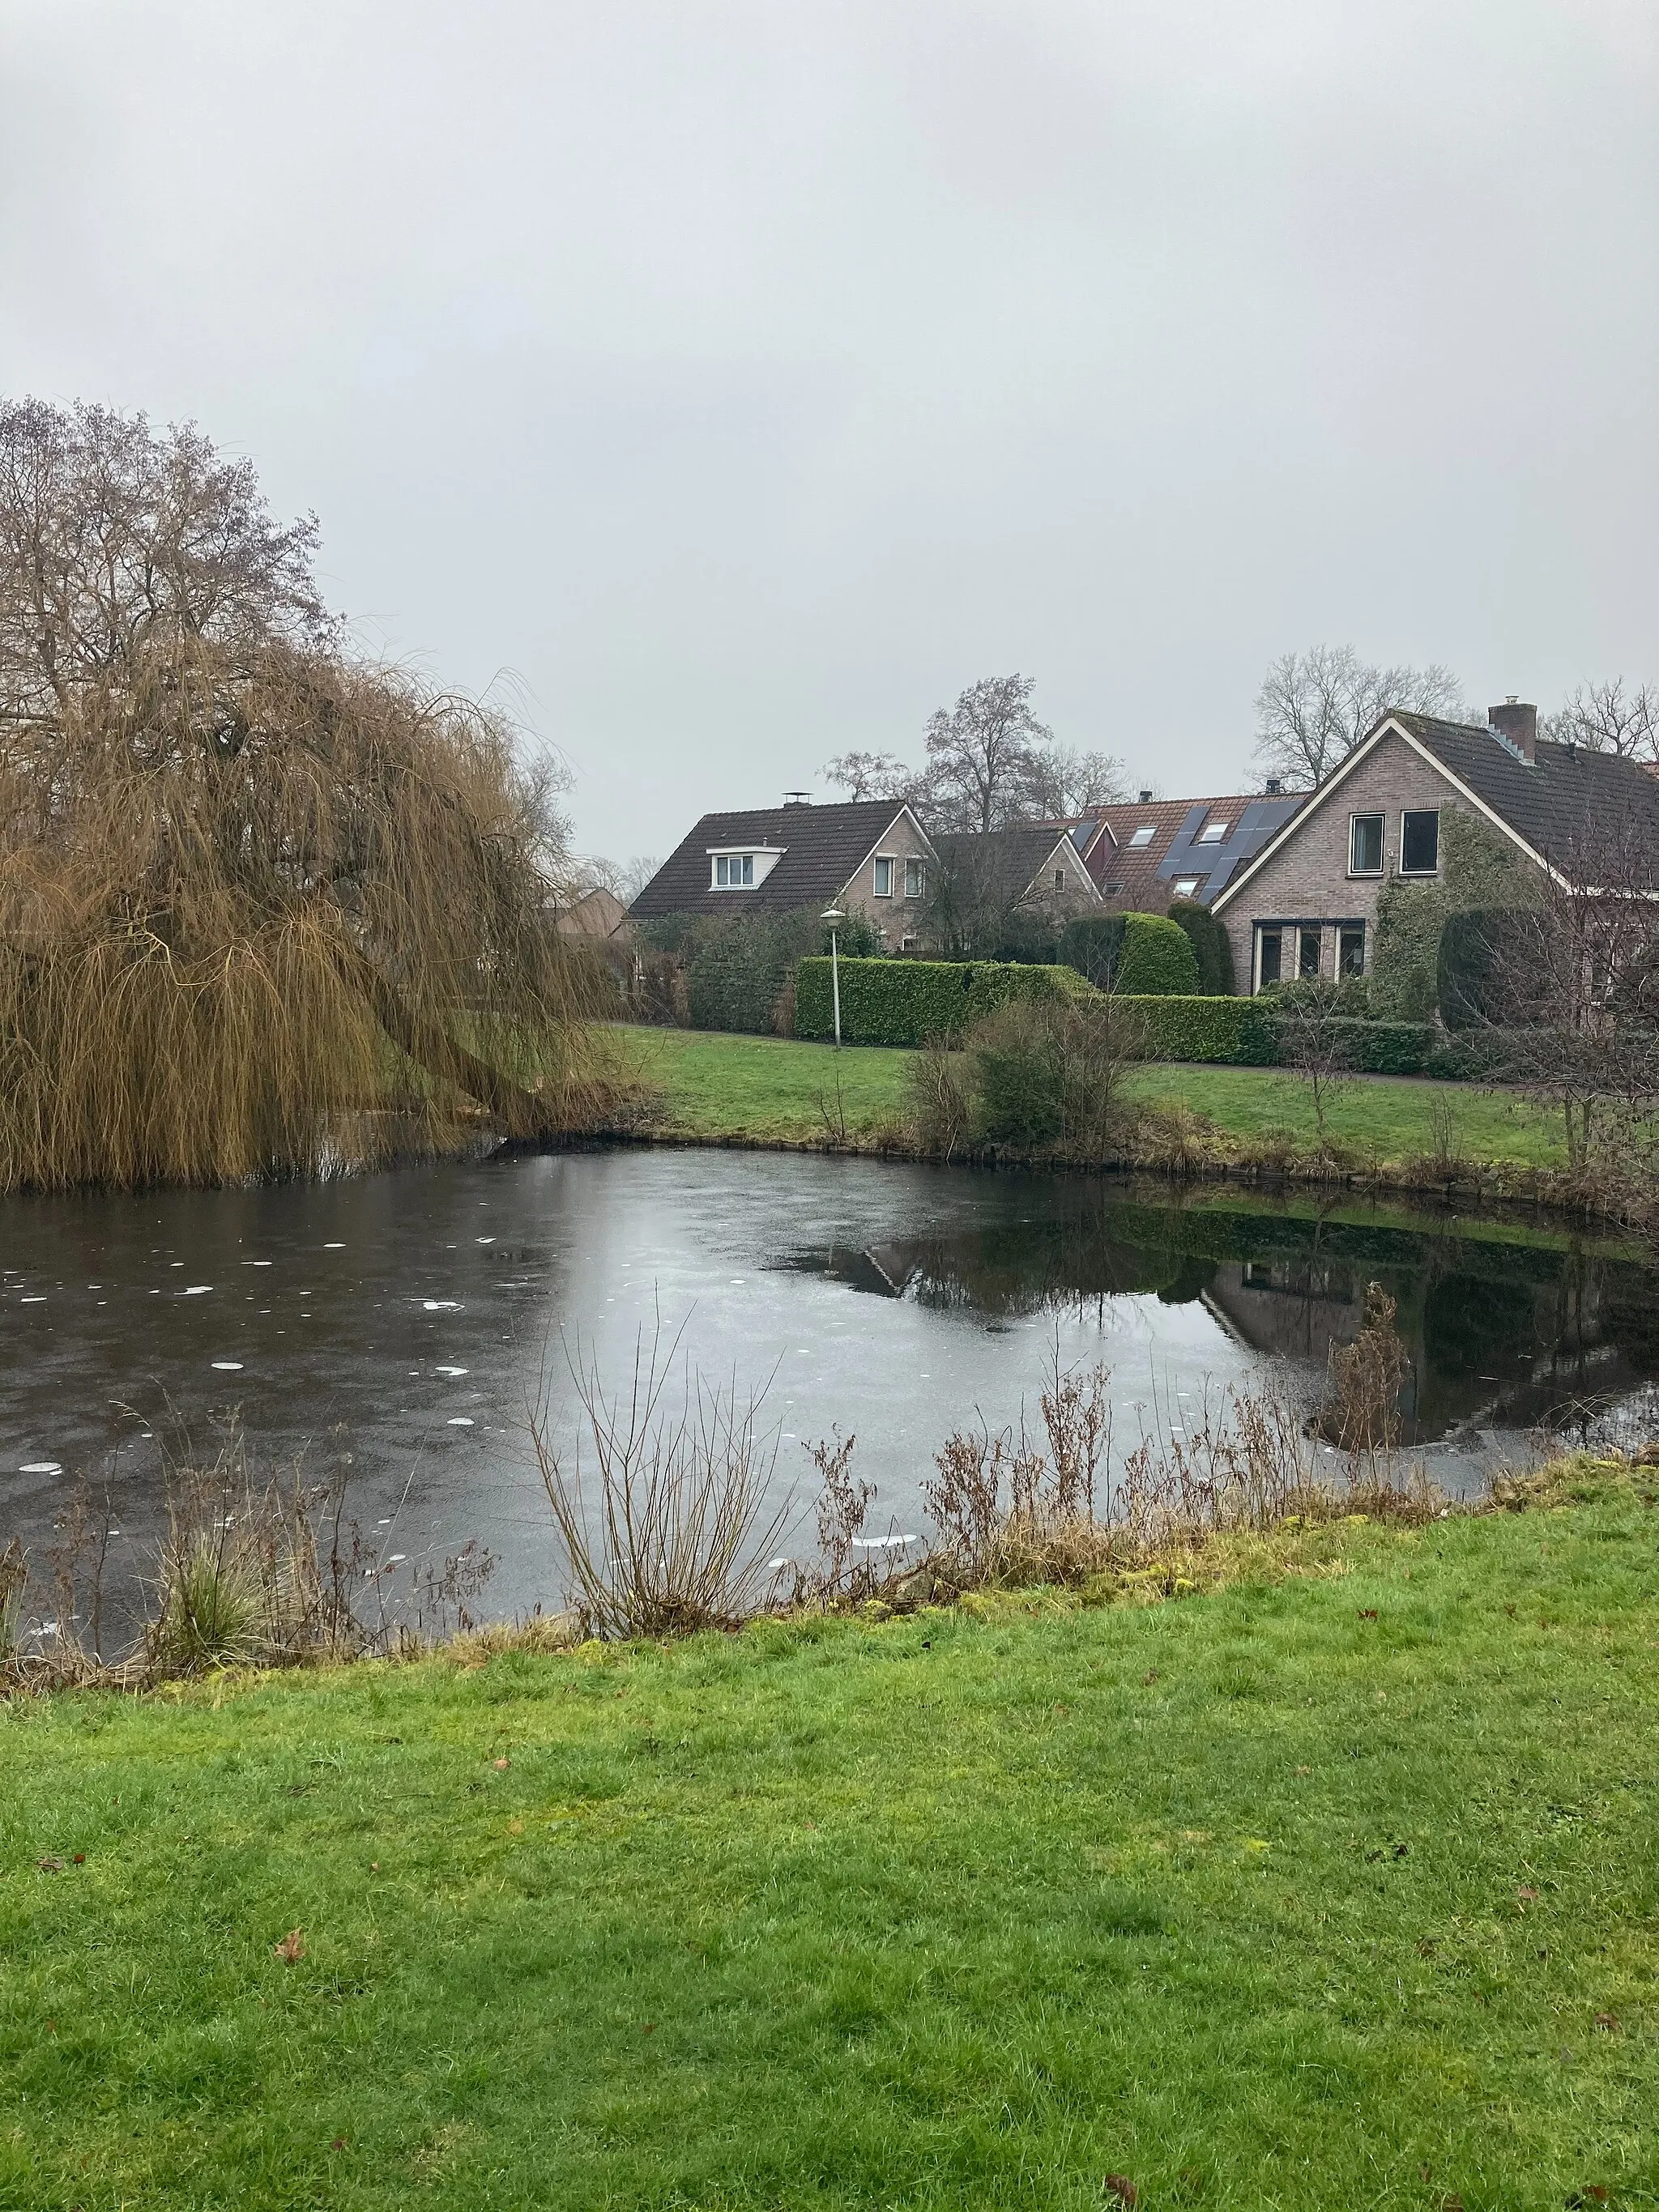 Photo showing: Some views of the village of De Wijk, Drenthe, Netherlands in February 2021